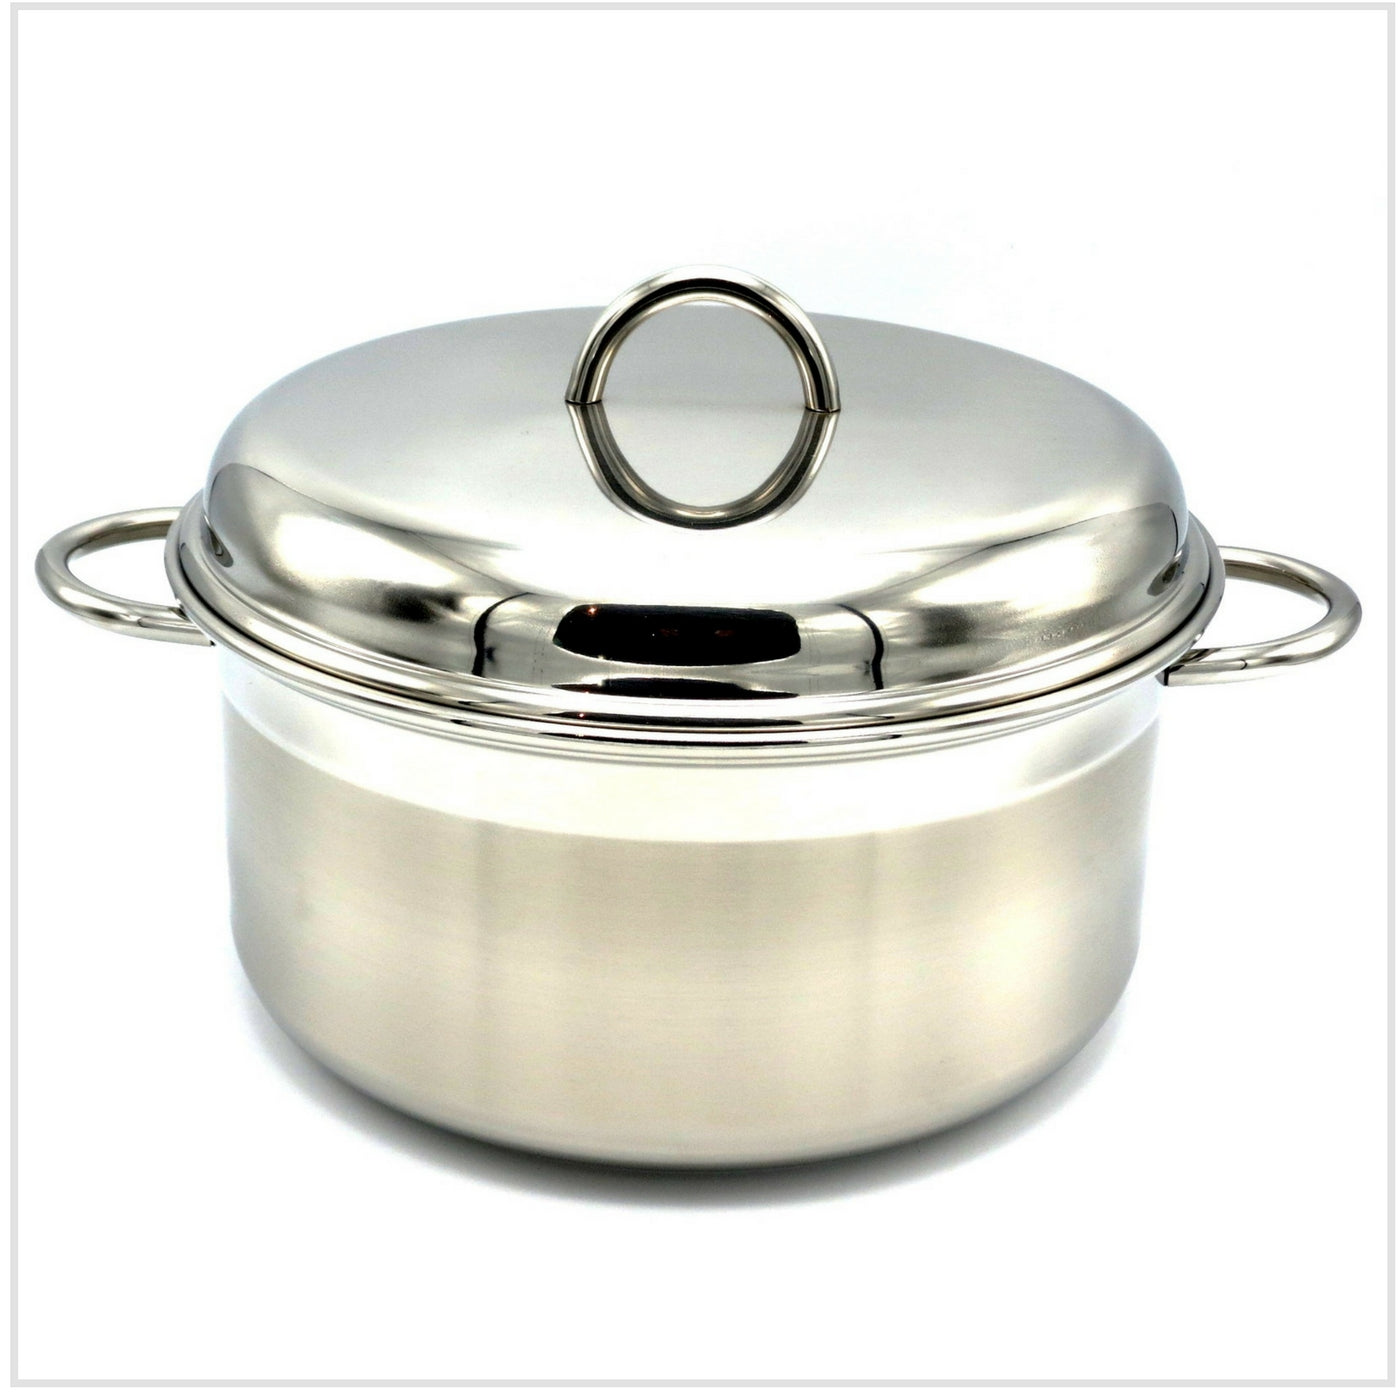 Le Pentole 3 Ply Stainless Steel Casserole with Lid - 28cm